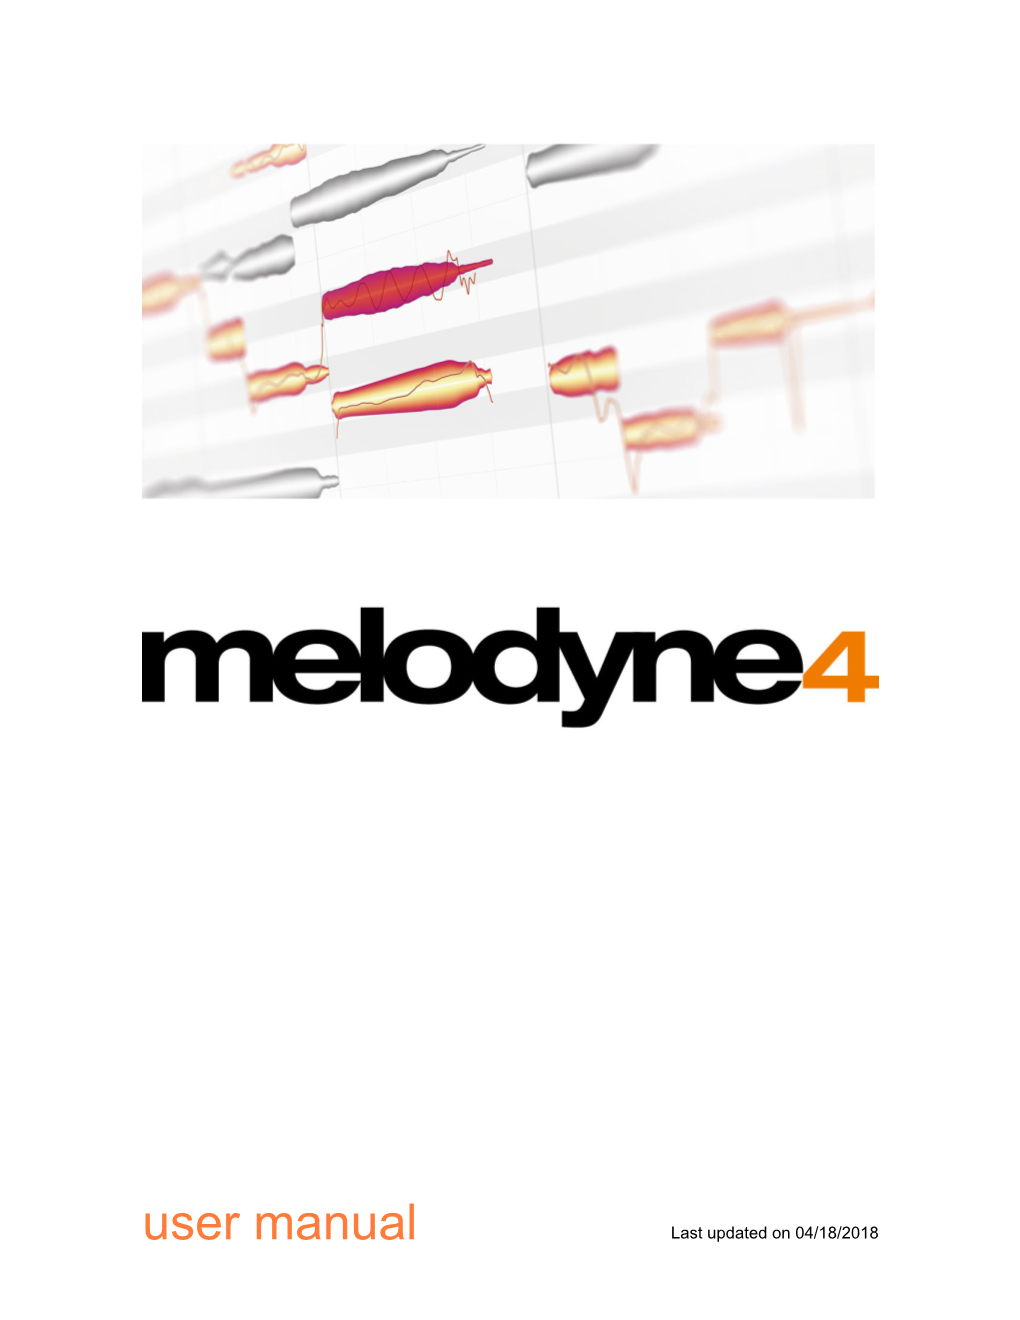 User Manual Last Updated on 04/18/2018 Melodyne 4 Essential